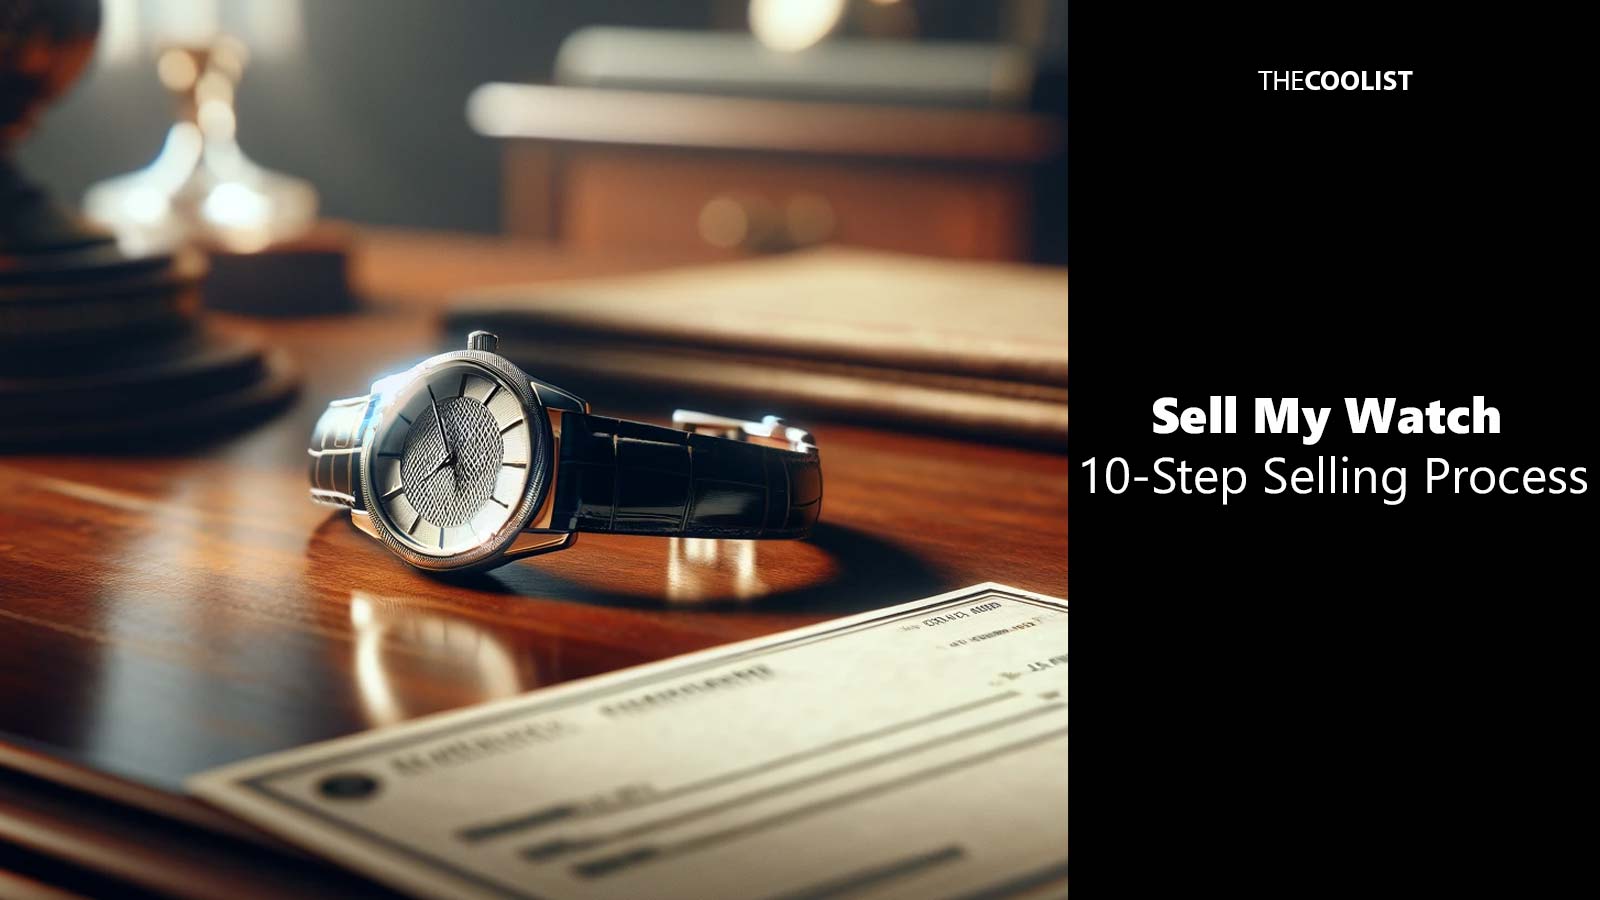 10 Steps for Selling a Watch